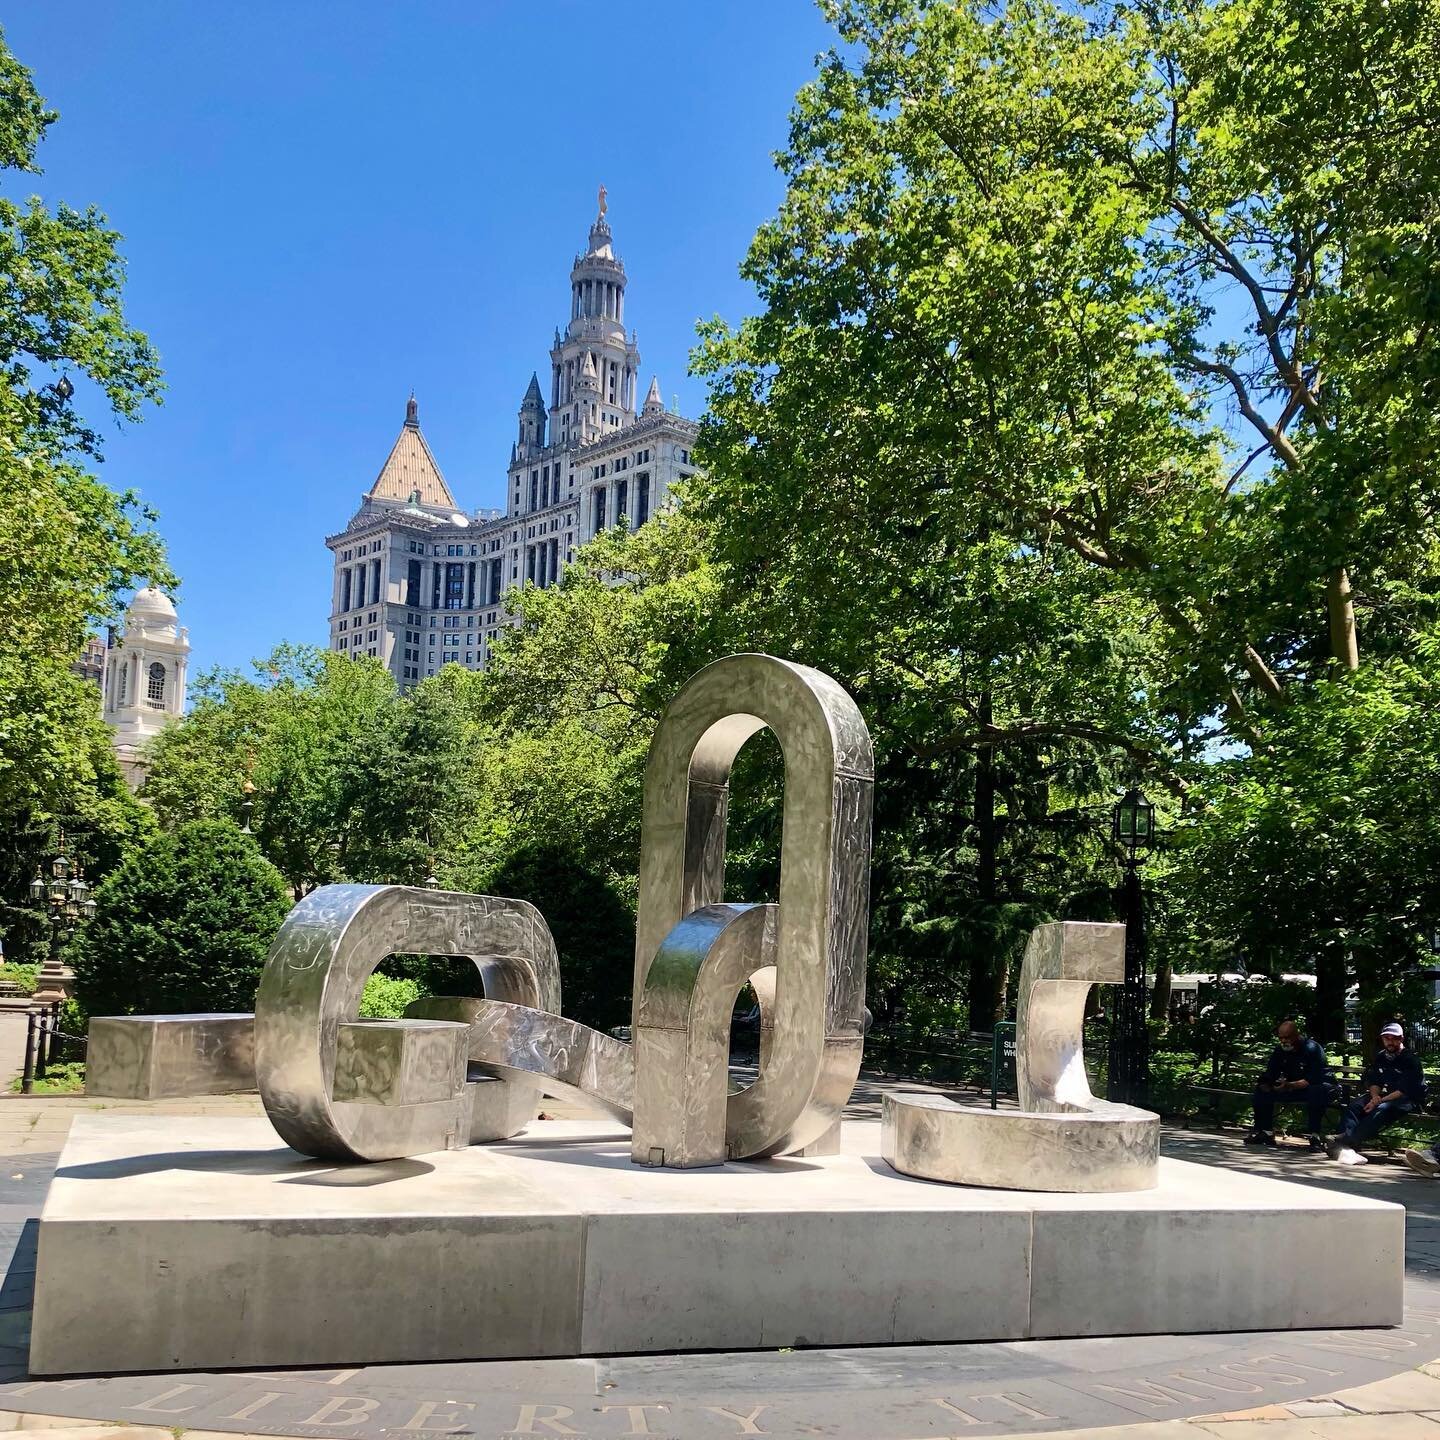 #MelvinEdwards #BrighterDays @publicartfund in #CityHallPark #newyorkcity #manhattan #SongOfTheBrokenChain on view through November 2021. Come visit and hire this guide and I&rsquo;ll show you! #newyorker #tourguide #walkingtour #history #art #archit